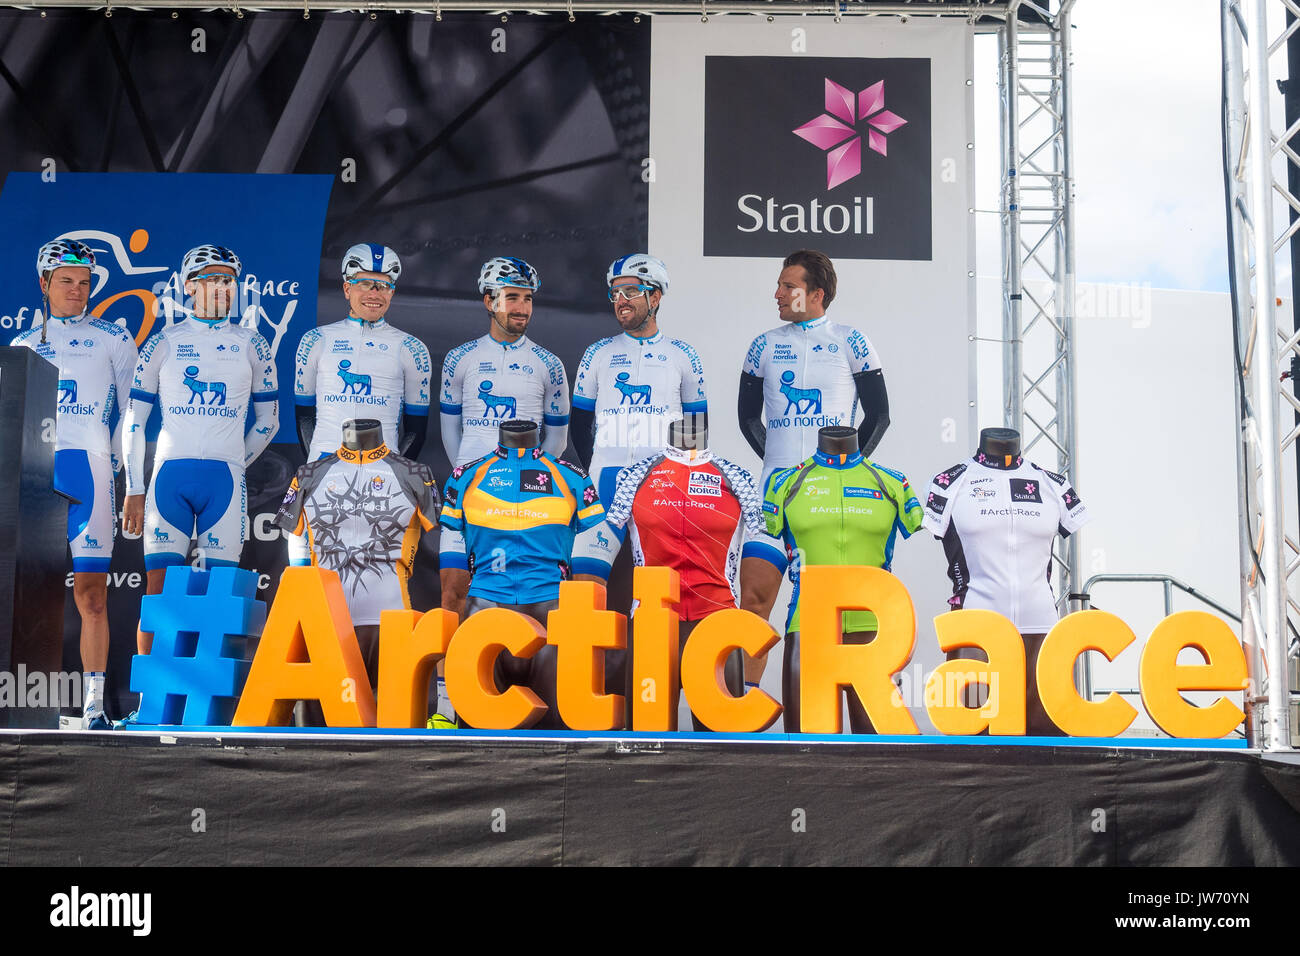 Photo from the annual Arctic Race of Noway. A Cycling competition over 4 days in the northern part of Norway. Cyclists from all over the world in pro, continental and amateur teams compete every year. Stock Photo